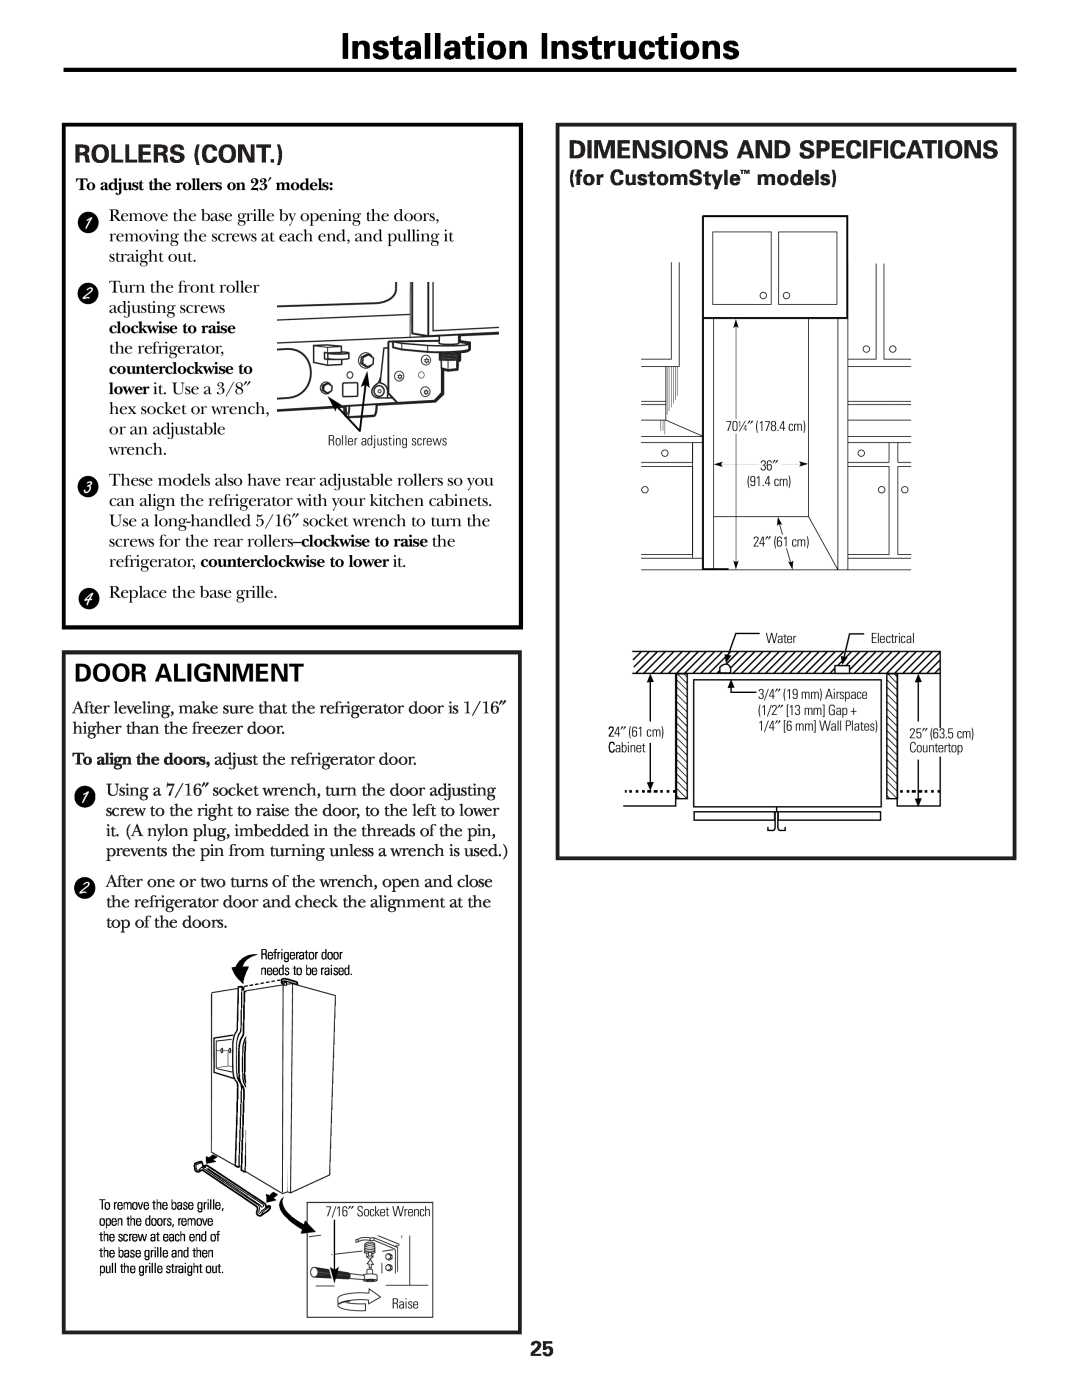 GE Installation Instructions, Rollers Cont, Dimensions And Specifications, Door Alignment, for CustomStyle models 